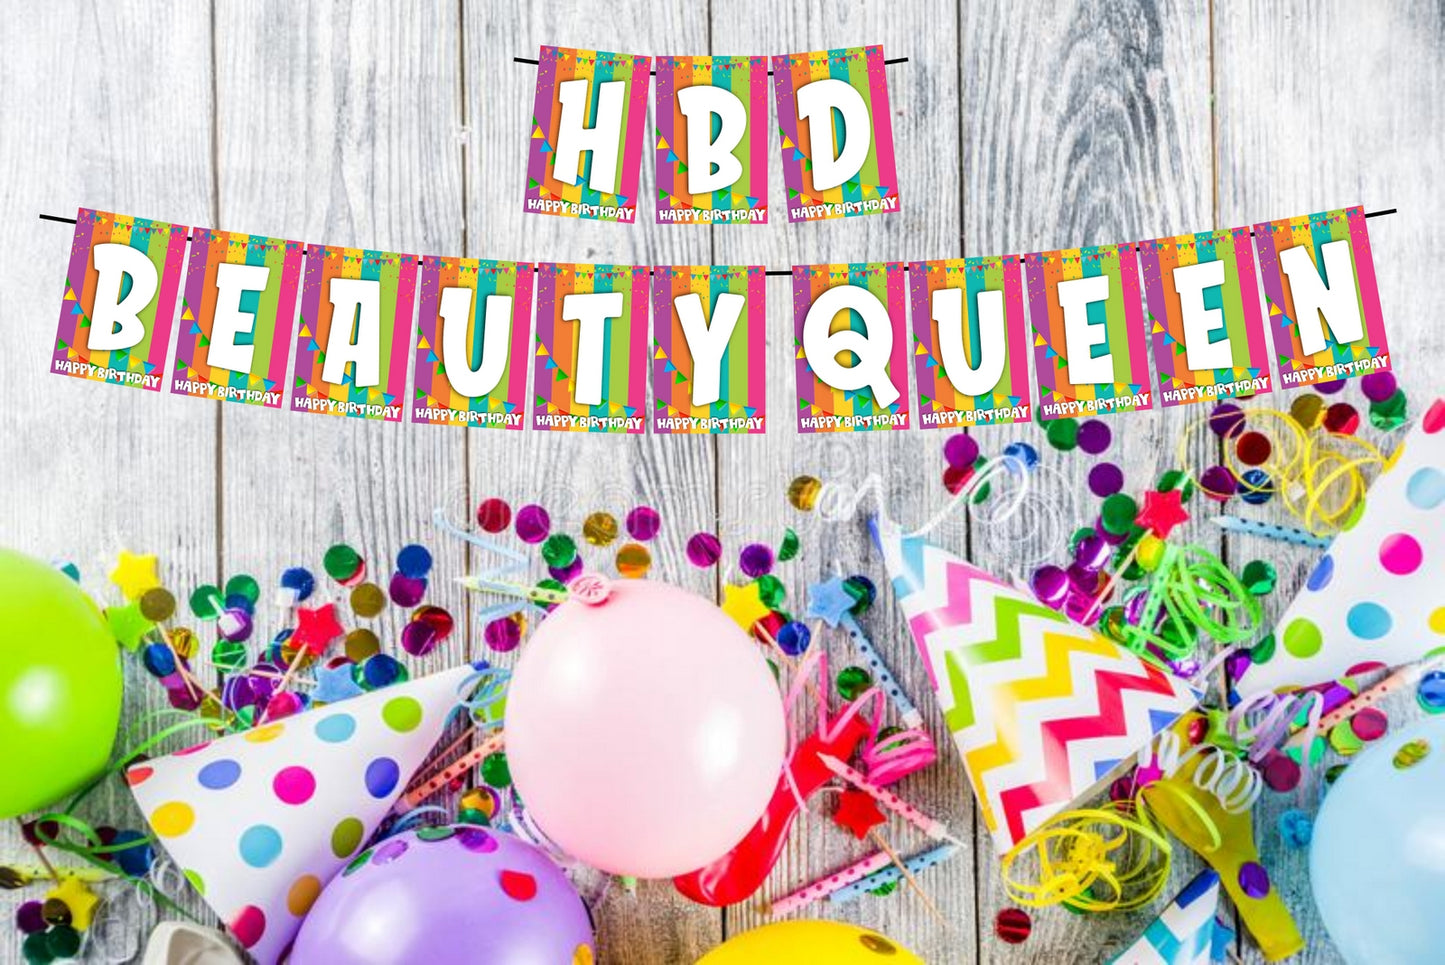 Happy Birthday Beauty Queen Birthday Decoration Hanging and Banner for Photo Shoot Backdrop and Theme Party